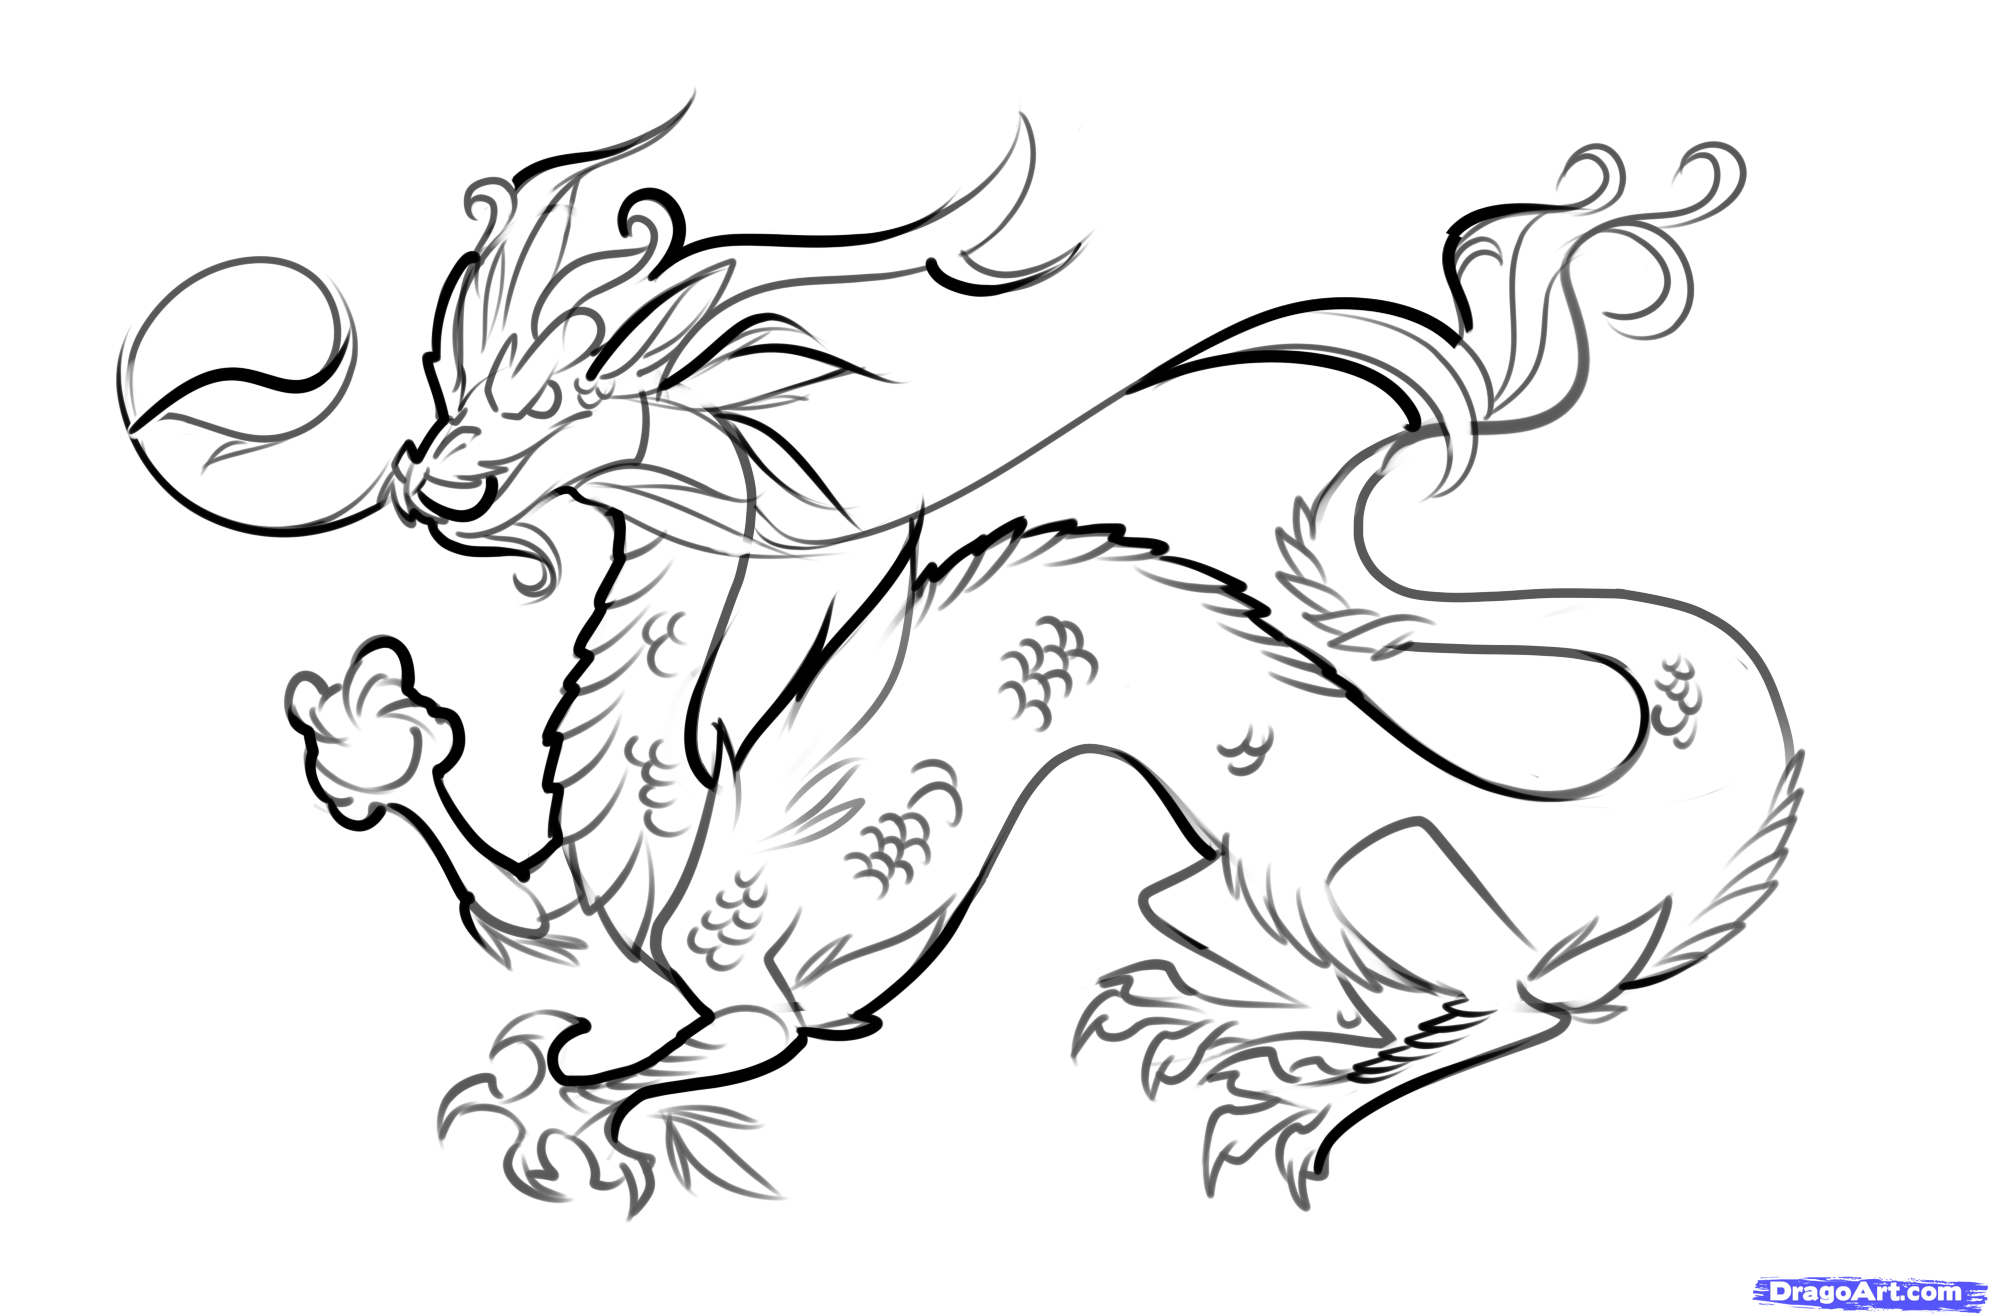 How to Draw a Chinese Dragon Easy, Step by Step, Dragons, Draw a ...